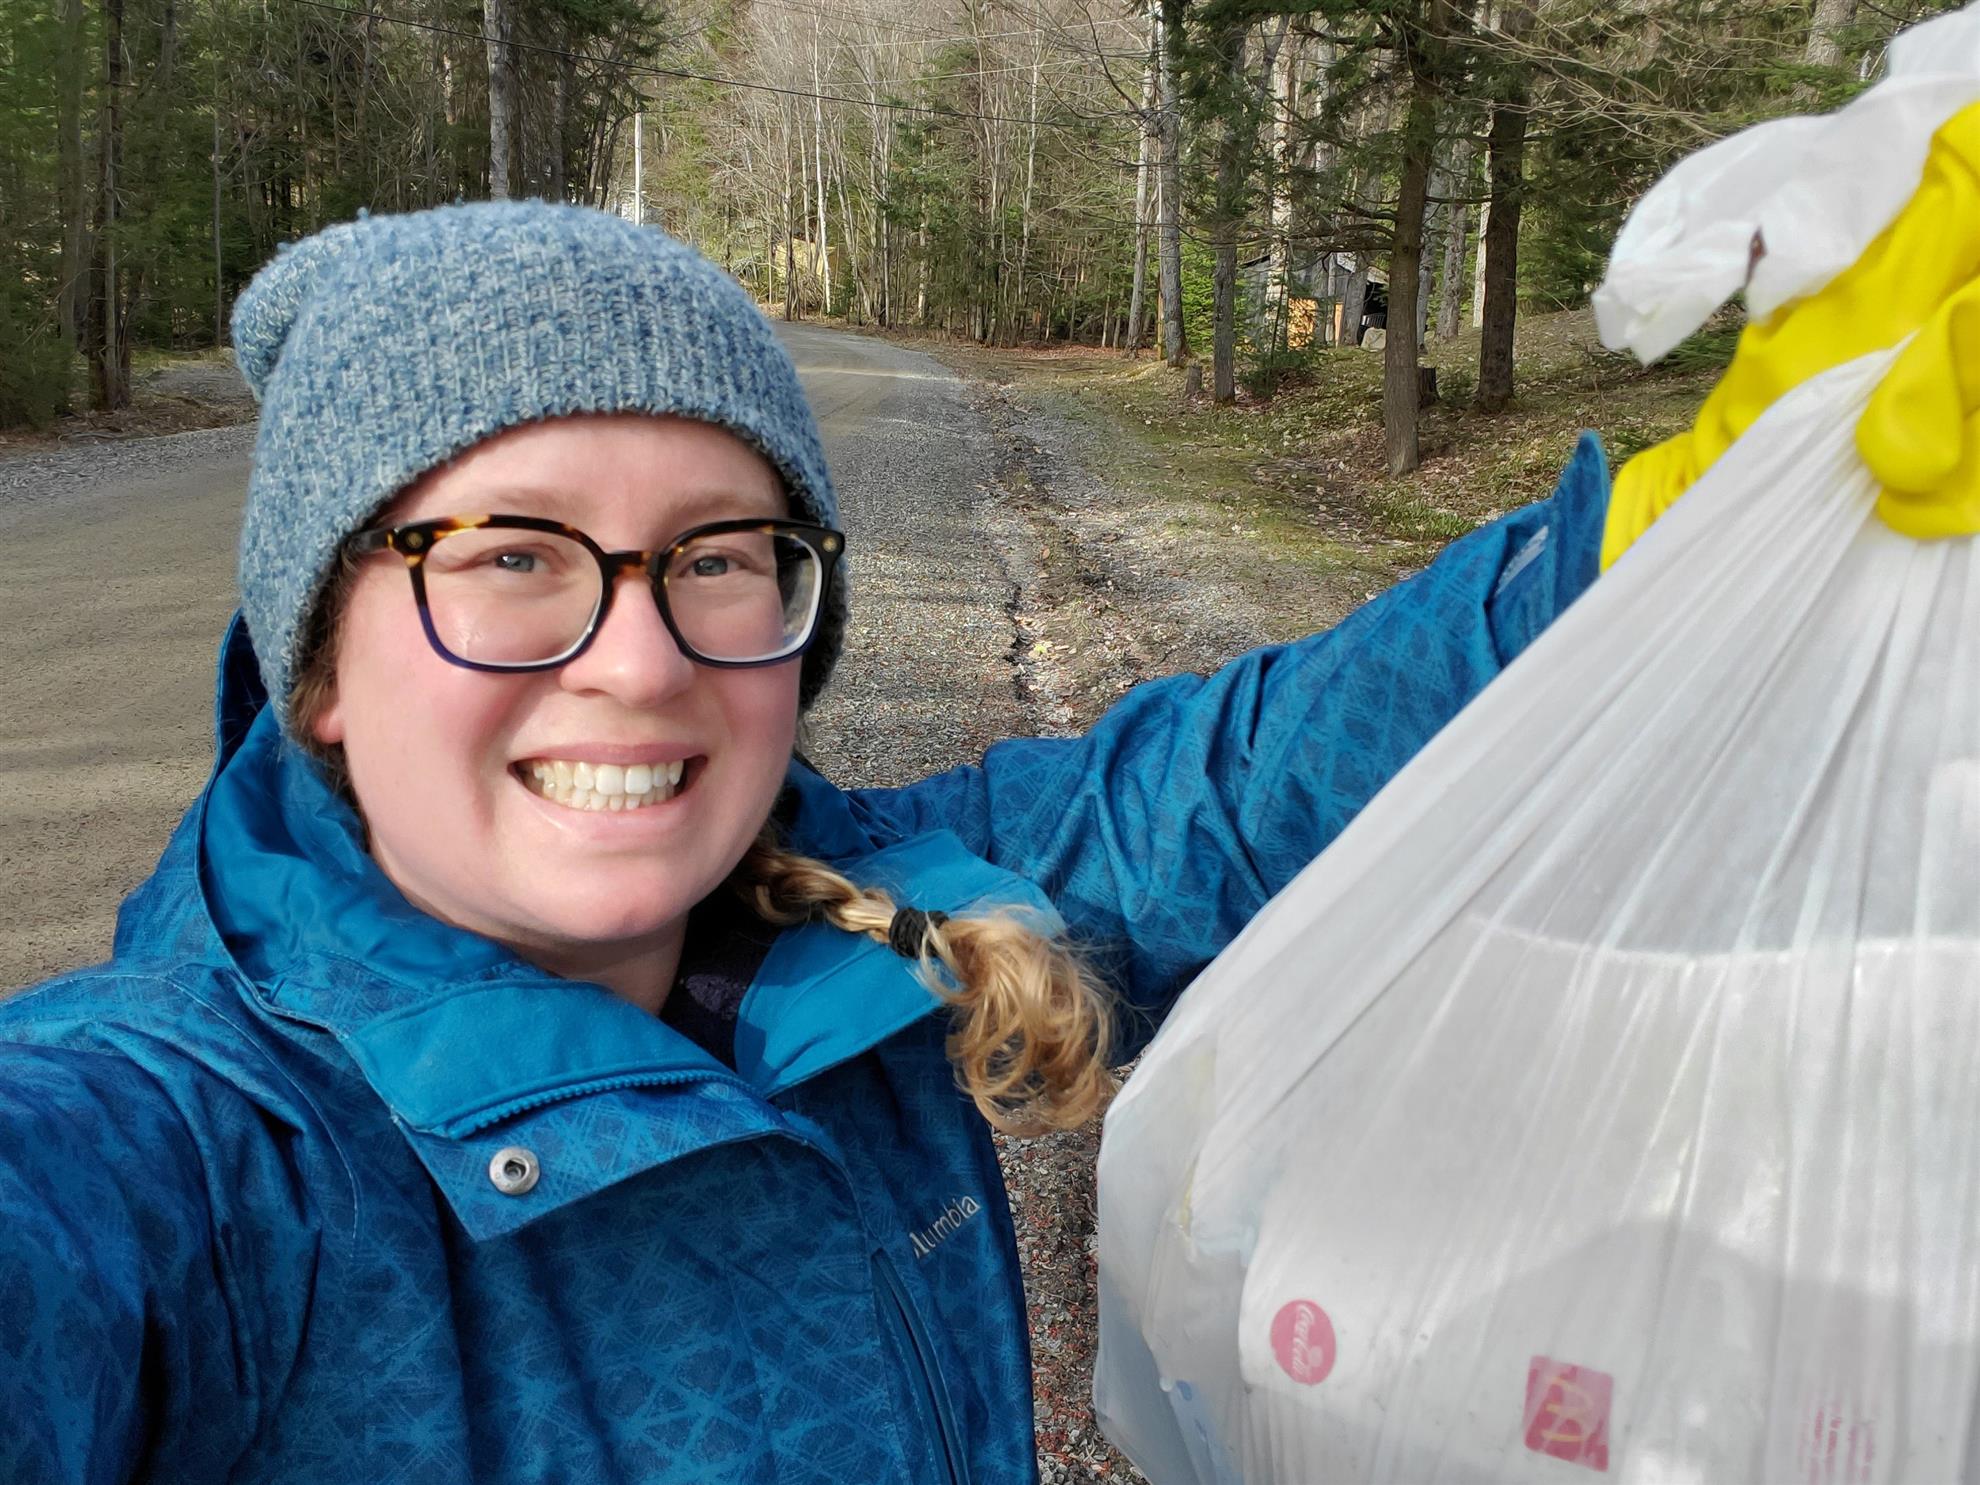 Amber holds up a bag of collected trash.